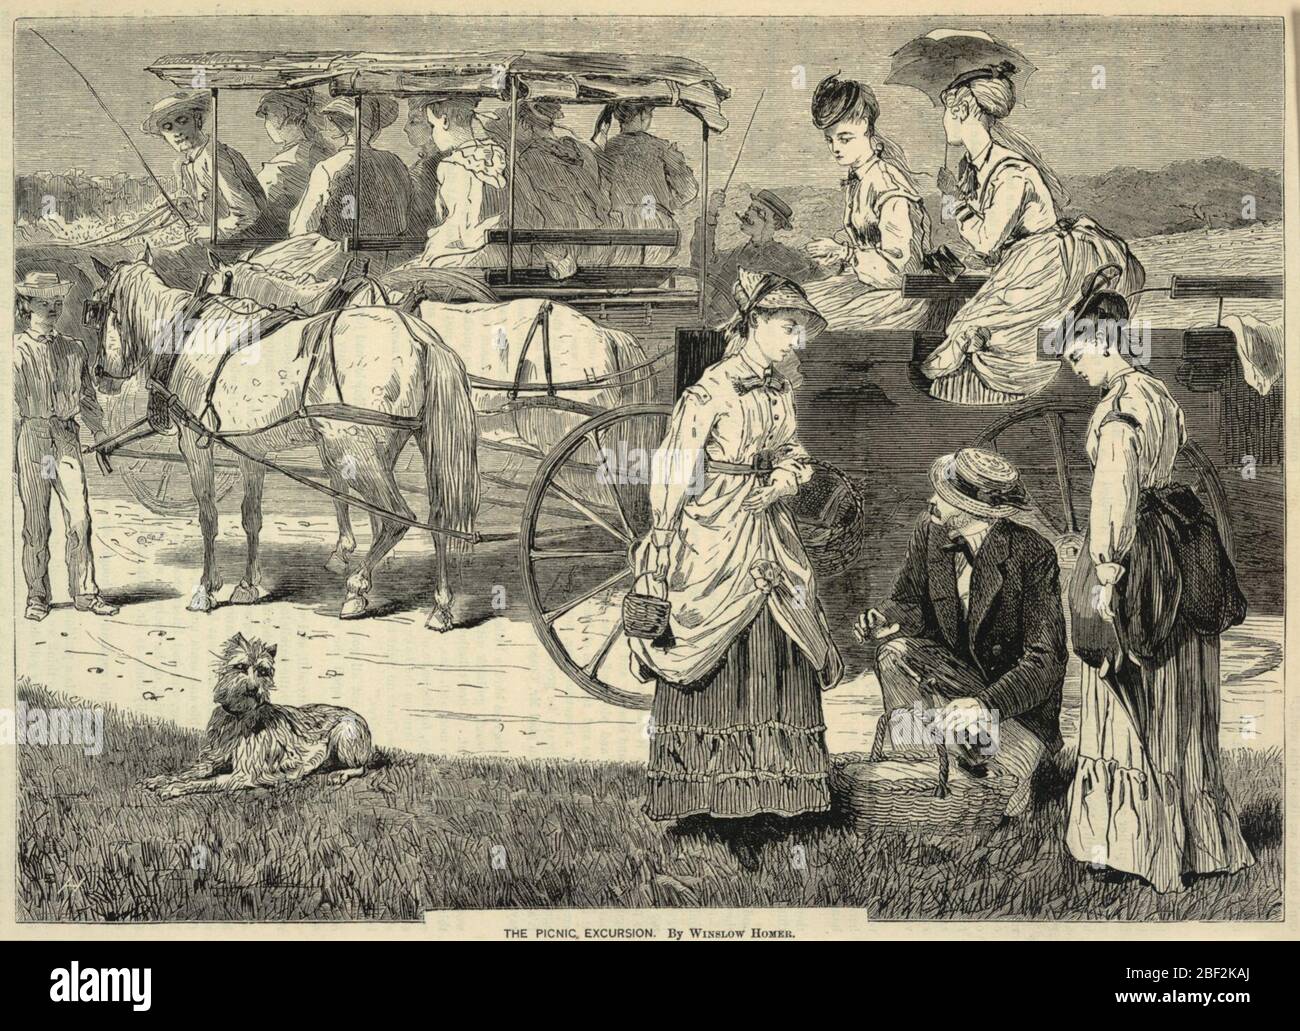 The Picnic Excursion from Appletons Journal of Literature Science and Art August 14 1869. Stock Photo